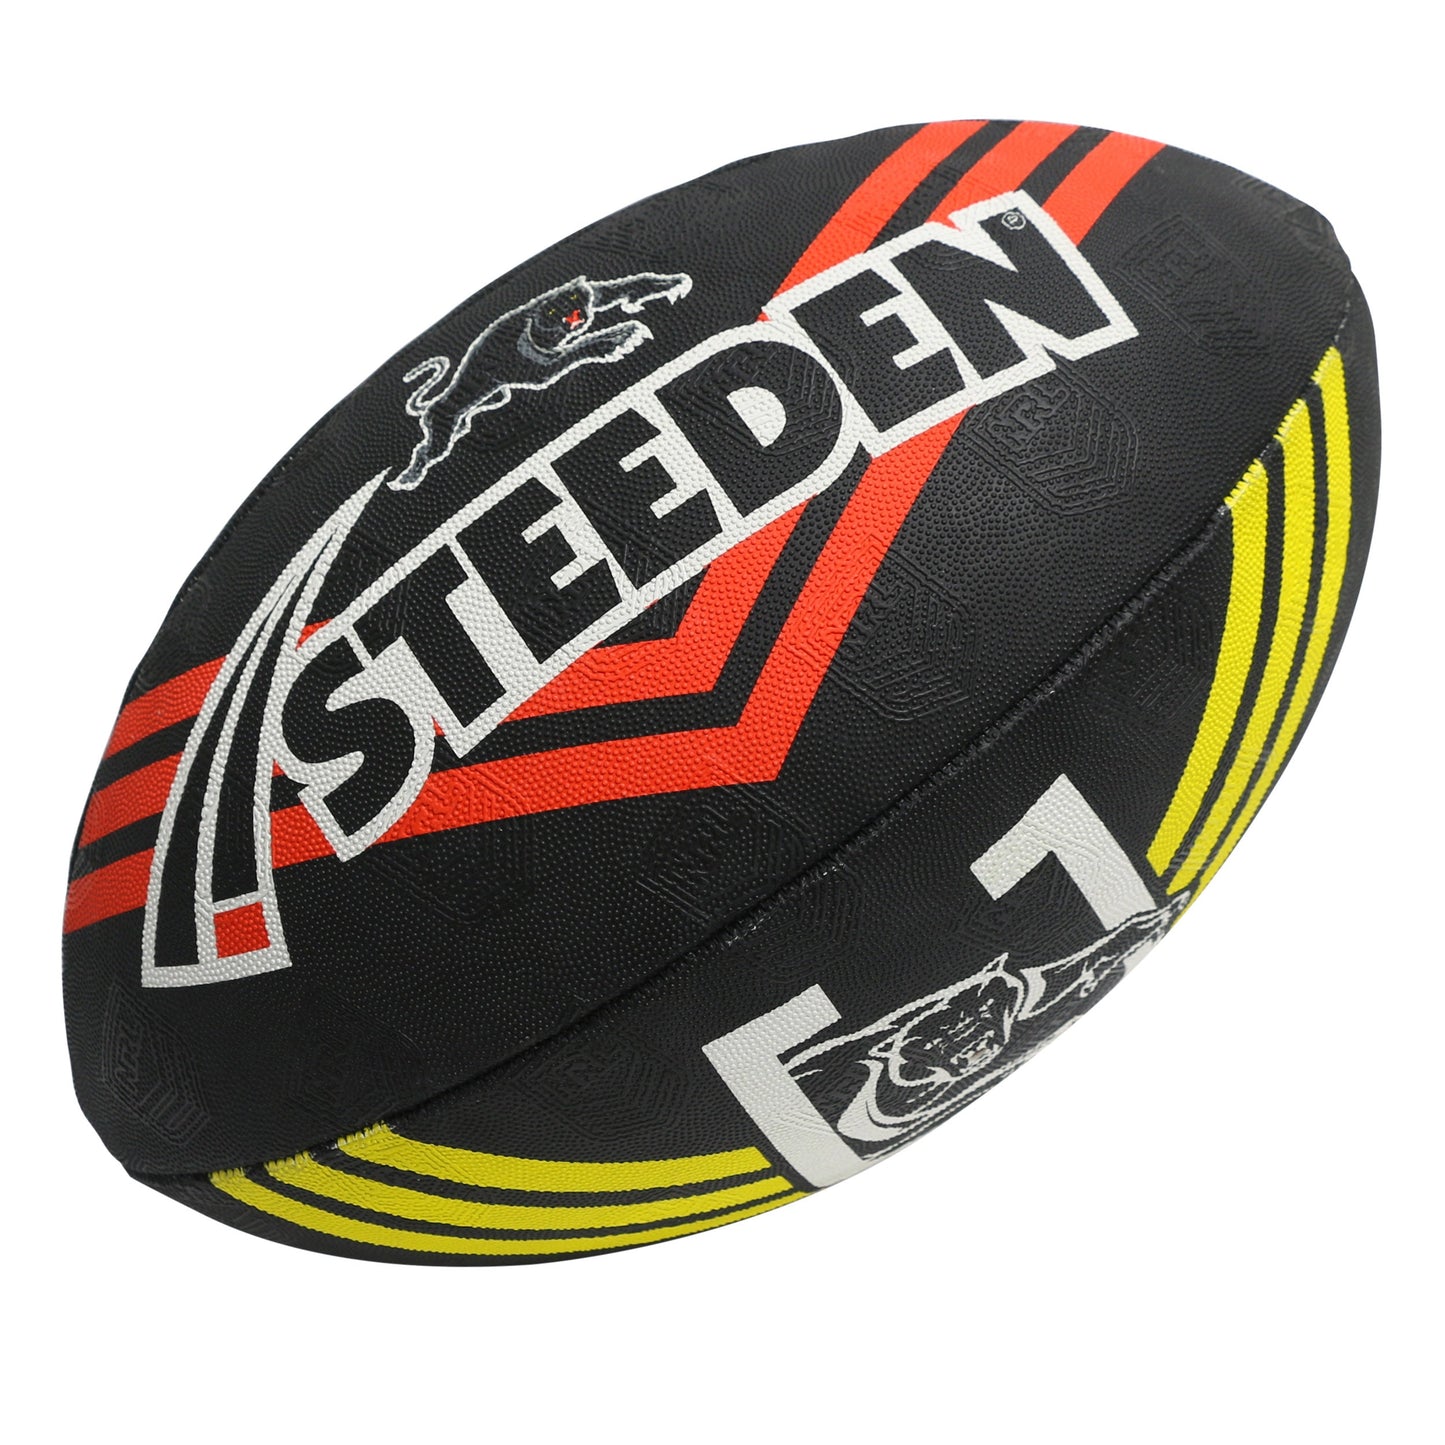 Panthers Supporter Ball - Sz 5